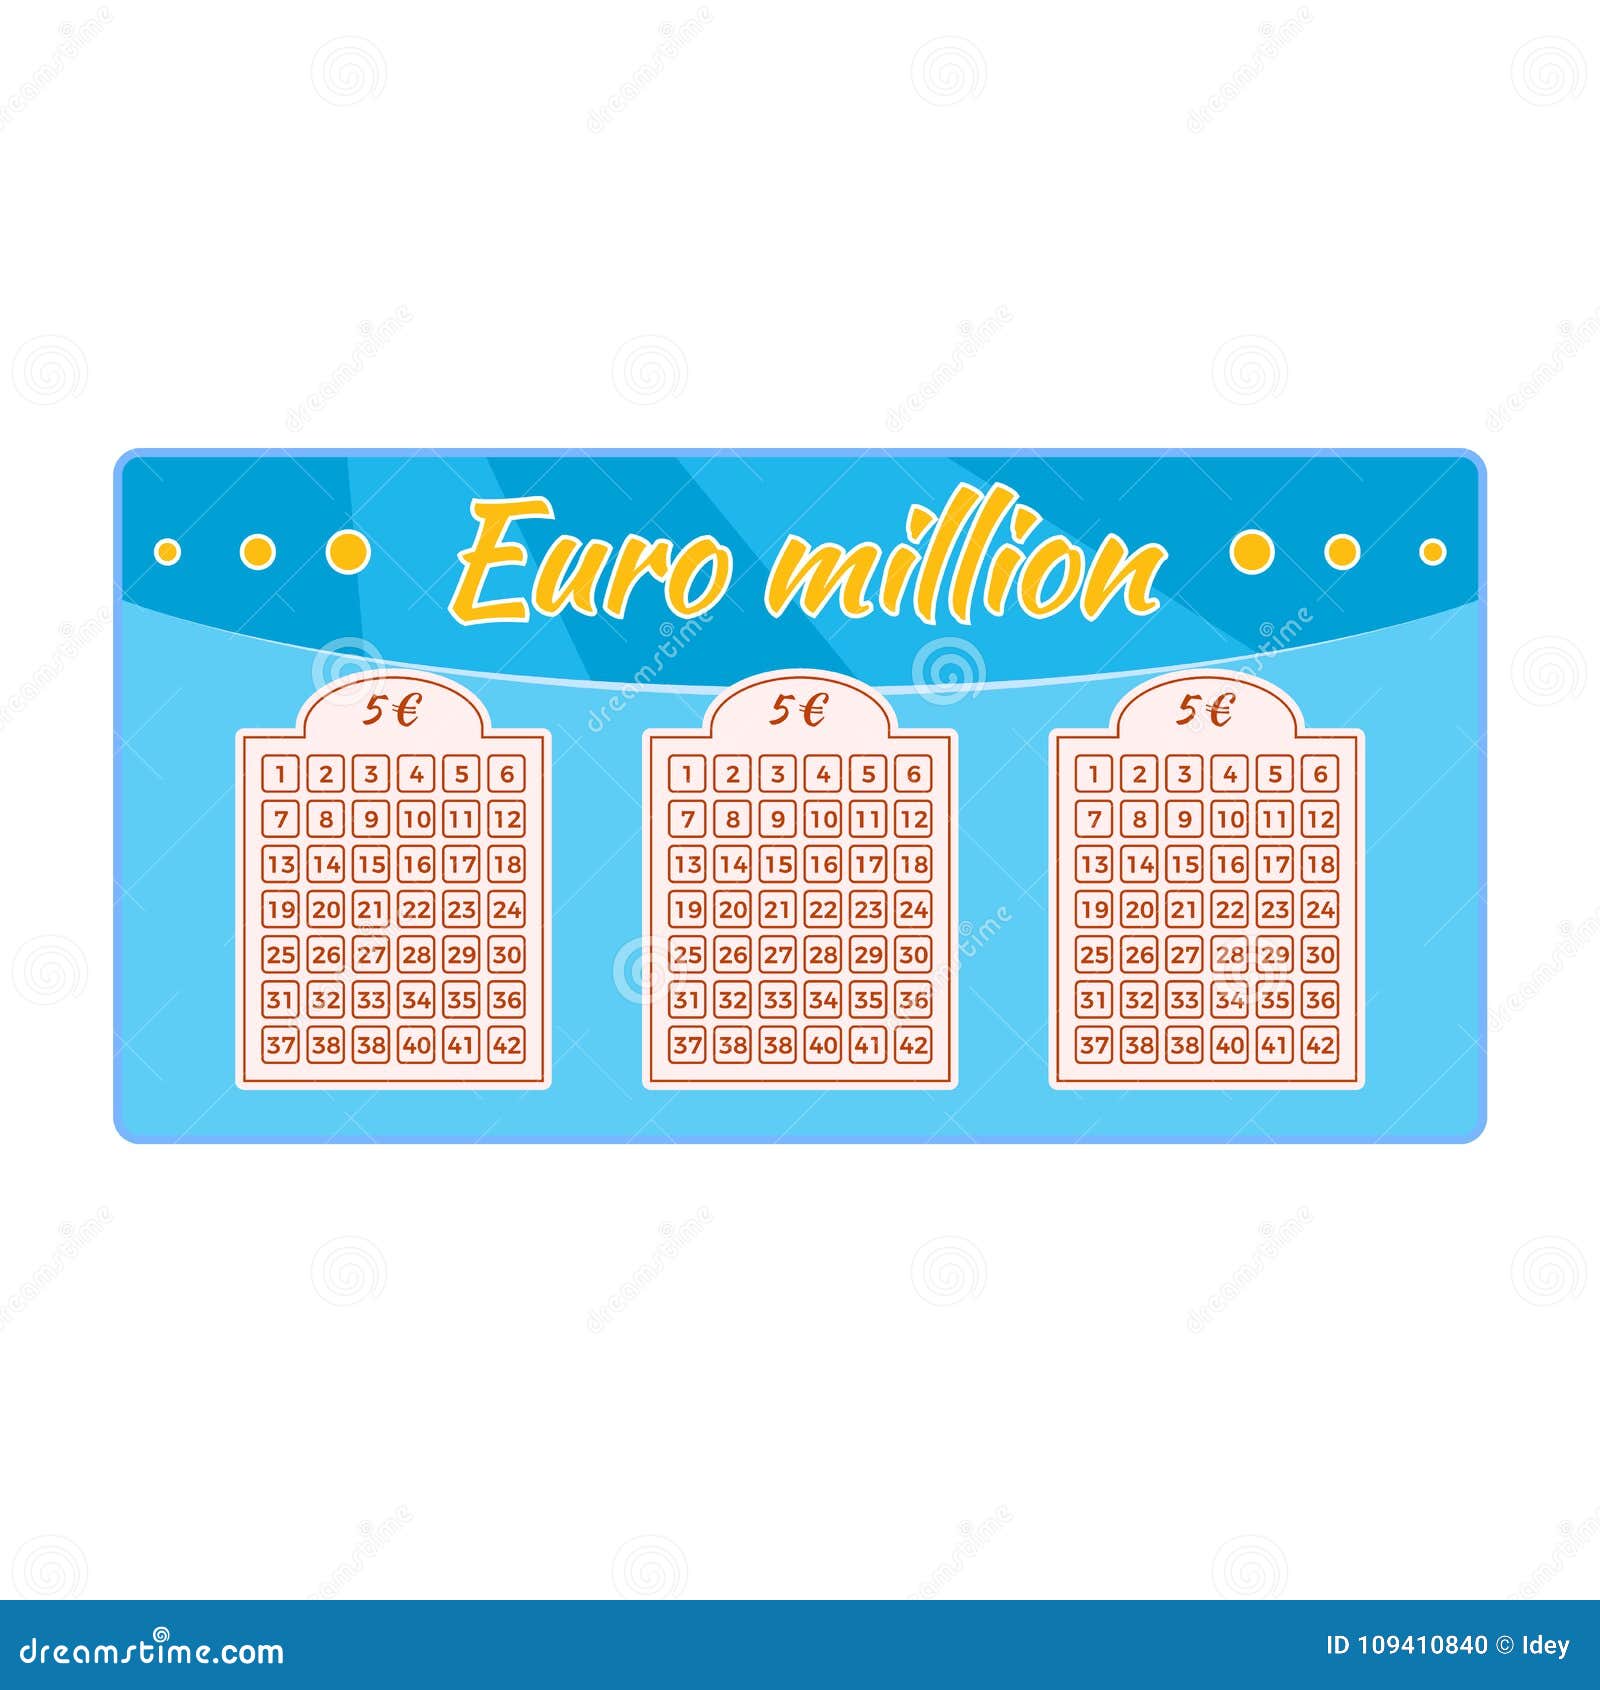 https://thumbs.dreamstime.com/z/lottery-ticket-drawing-money-game-numbers-euro-million-lottery-ticket-drawing-money-prizes-ticket-event-concept-109410840.jpg